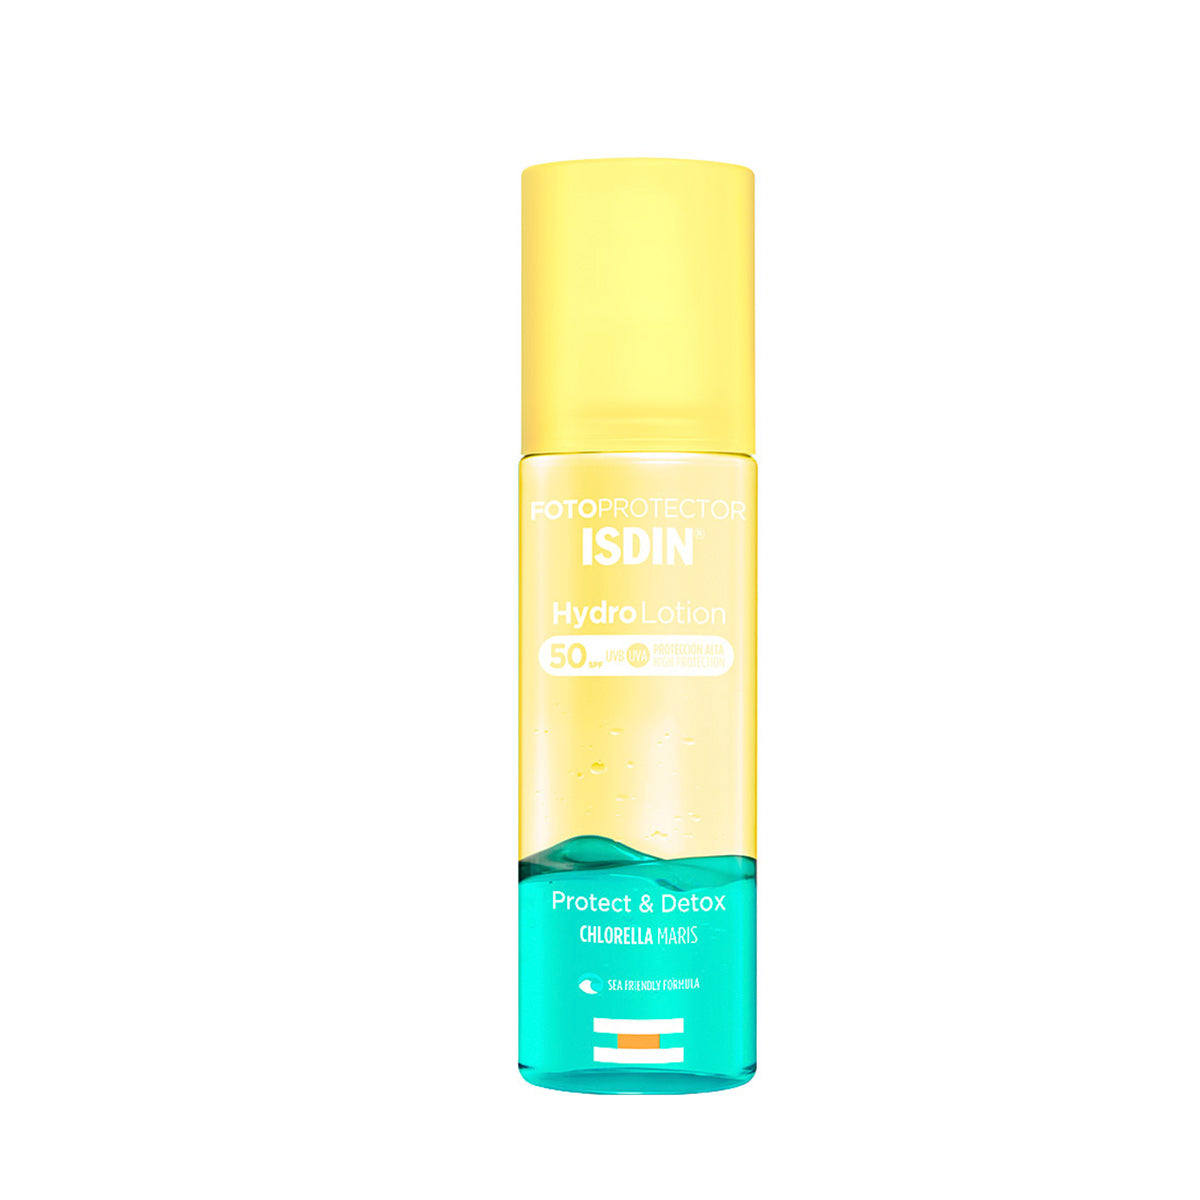 FOTOPROTECTOR HYDRO LOTION SPF50 200ml